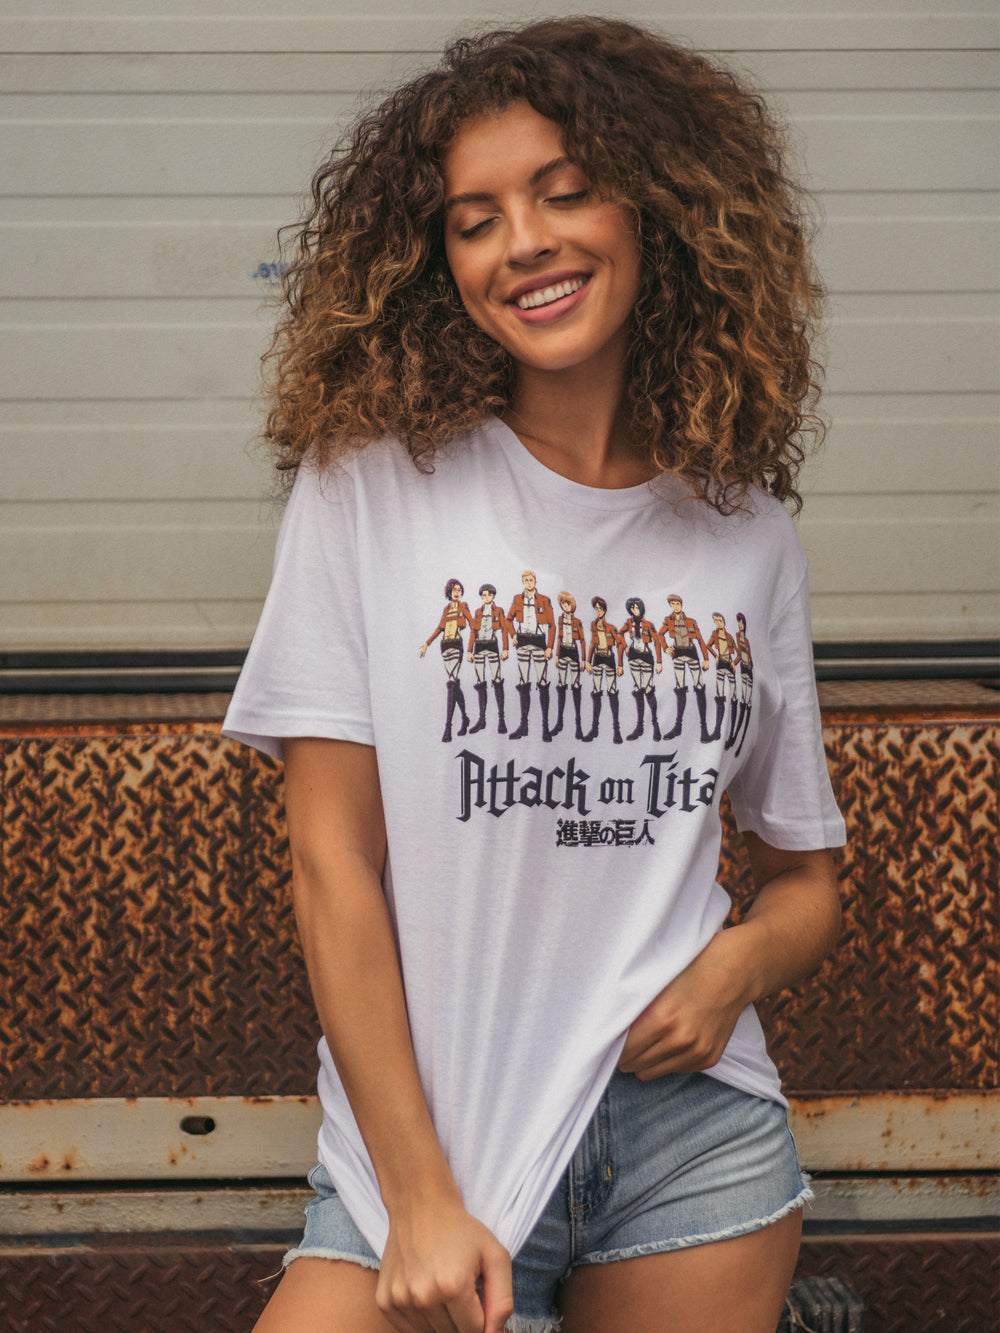 NTD APPAREL ATTACK ON TITAN GROUP T-SHIRT - CLEARANCE